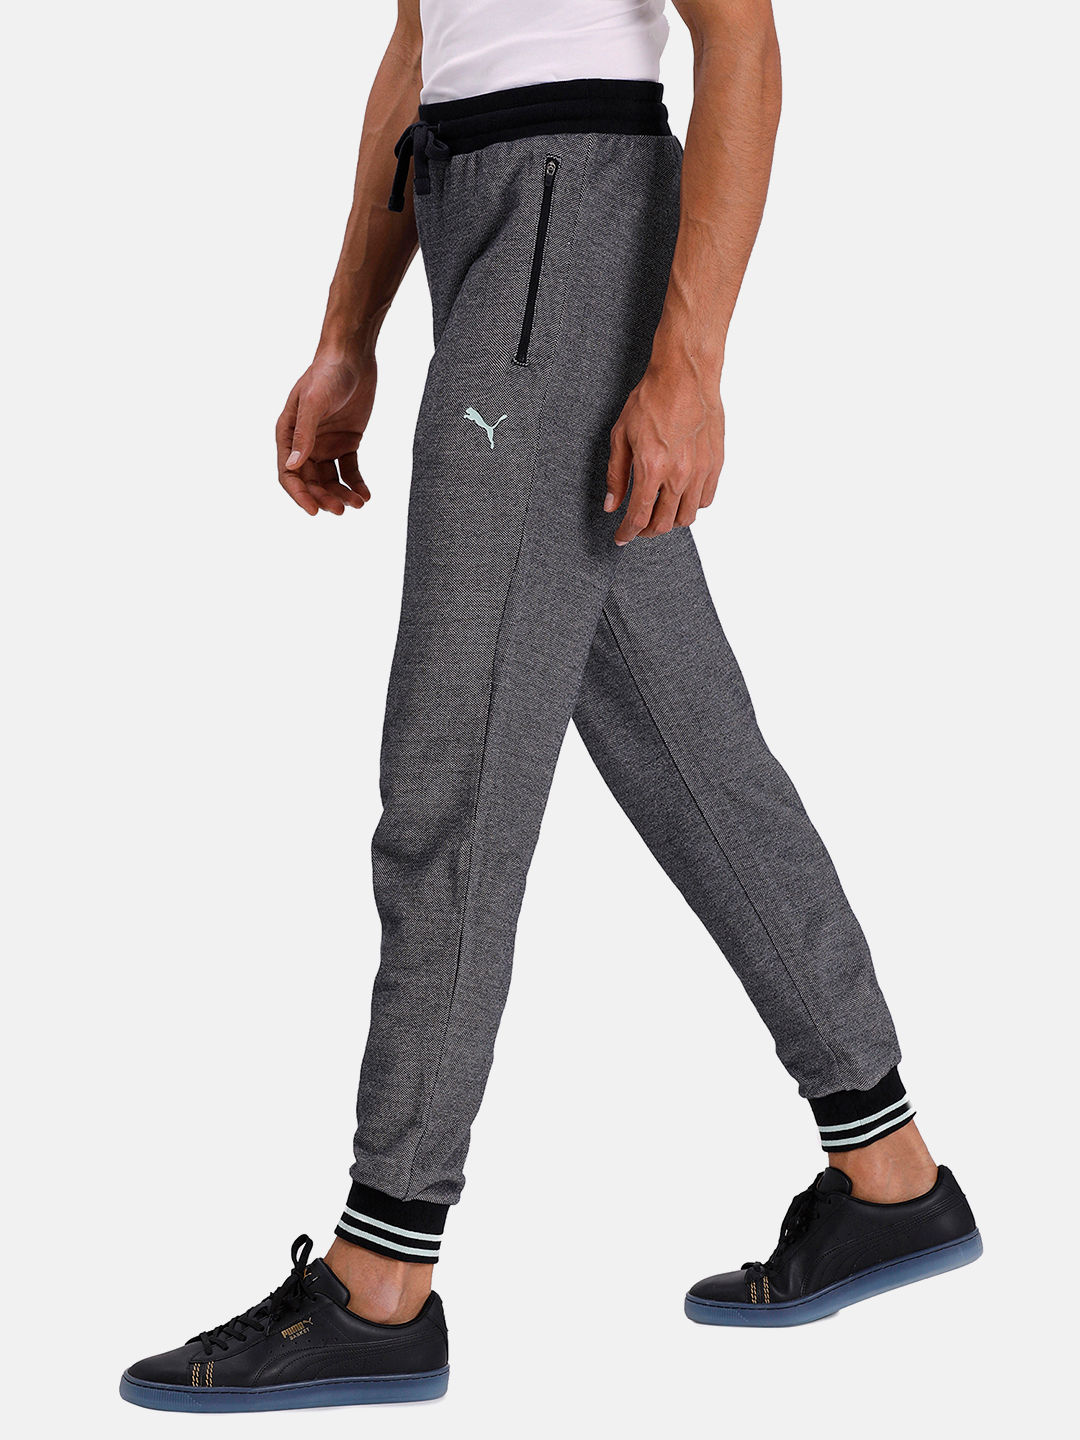 Puma Trousers - Classic+ Flared - Black » New Products Every Day